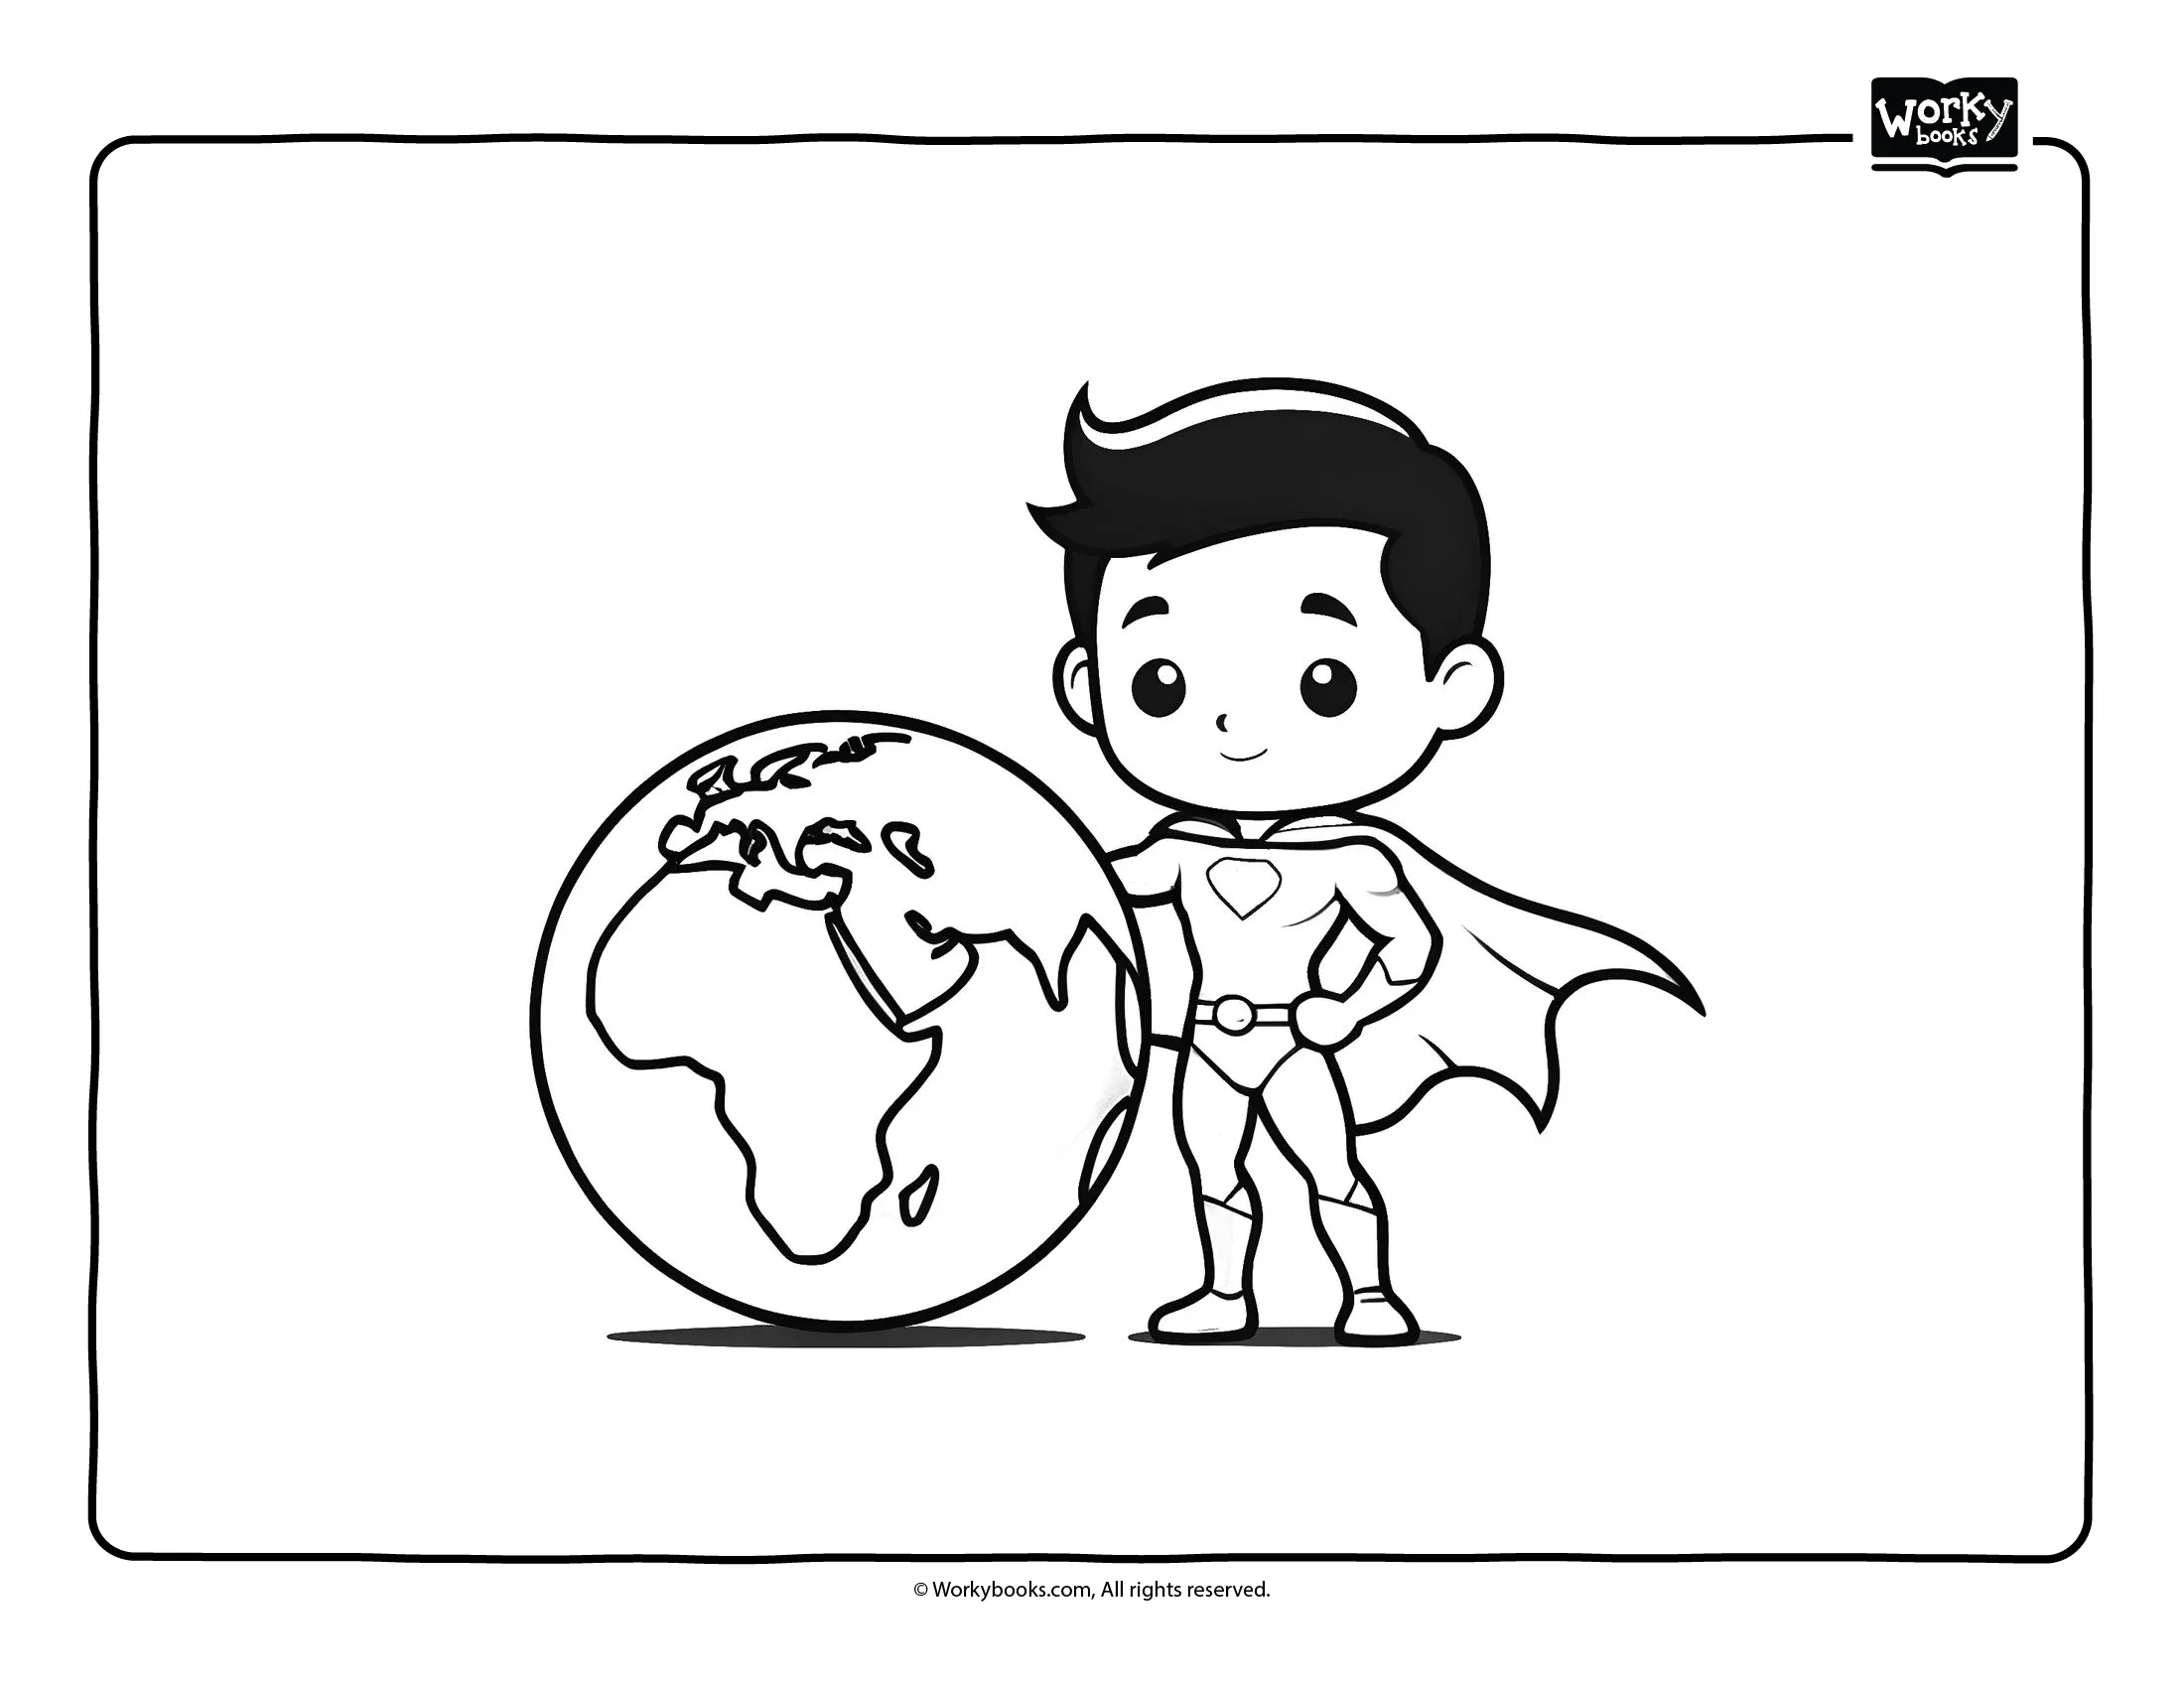 Environment Superheroes coloring page